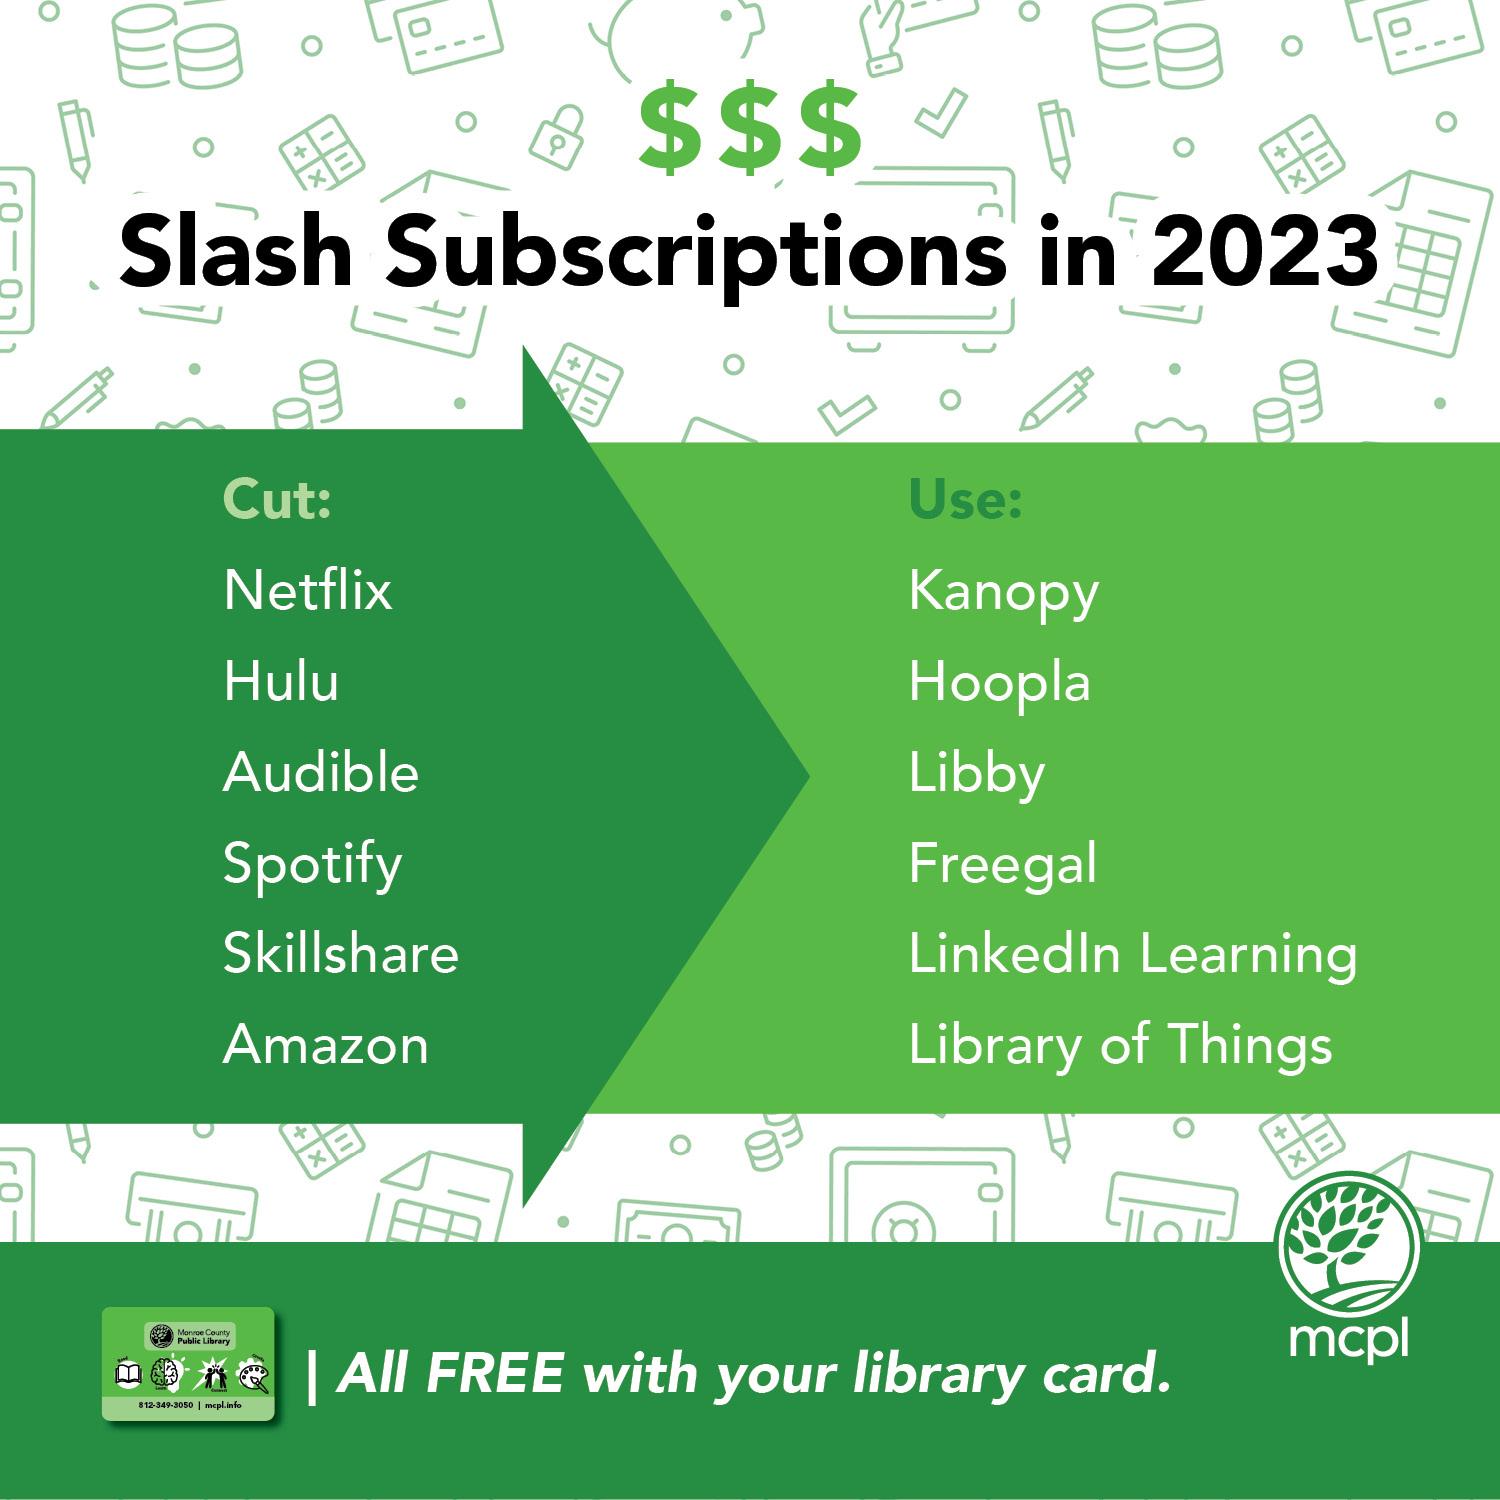 Text reads Slash Subscriptions in 2023. An arrow in the background points from cut to use and Netflix to Kanopy, Hulu to Hoopla, Audible to Libby, Spotify to Freegal, Skillshare to LinkedIn Learning, Amazon to Library of Things. All FREE with your library card.